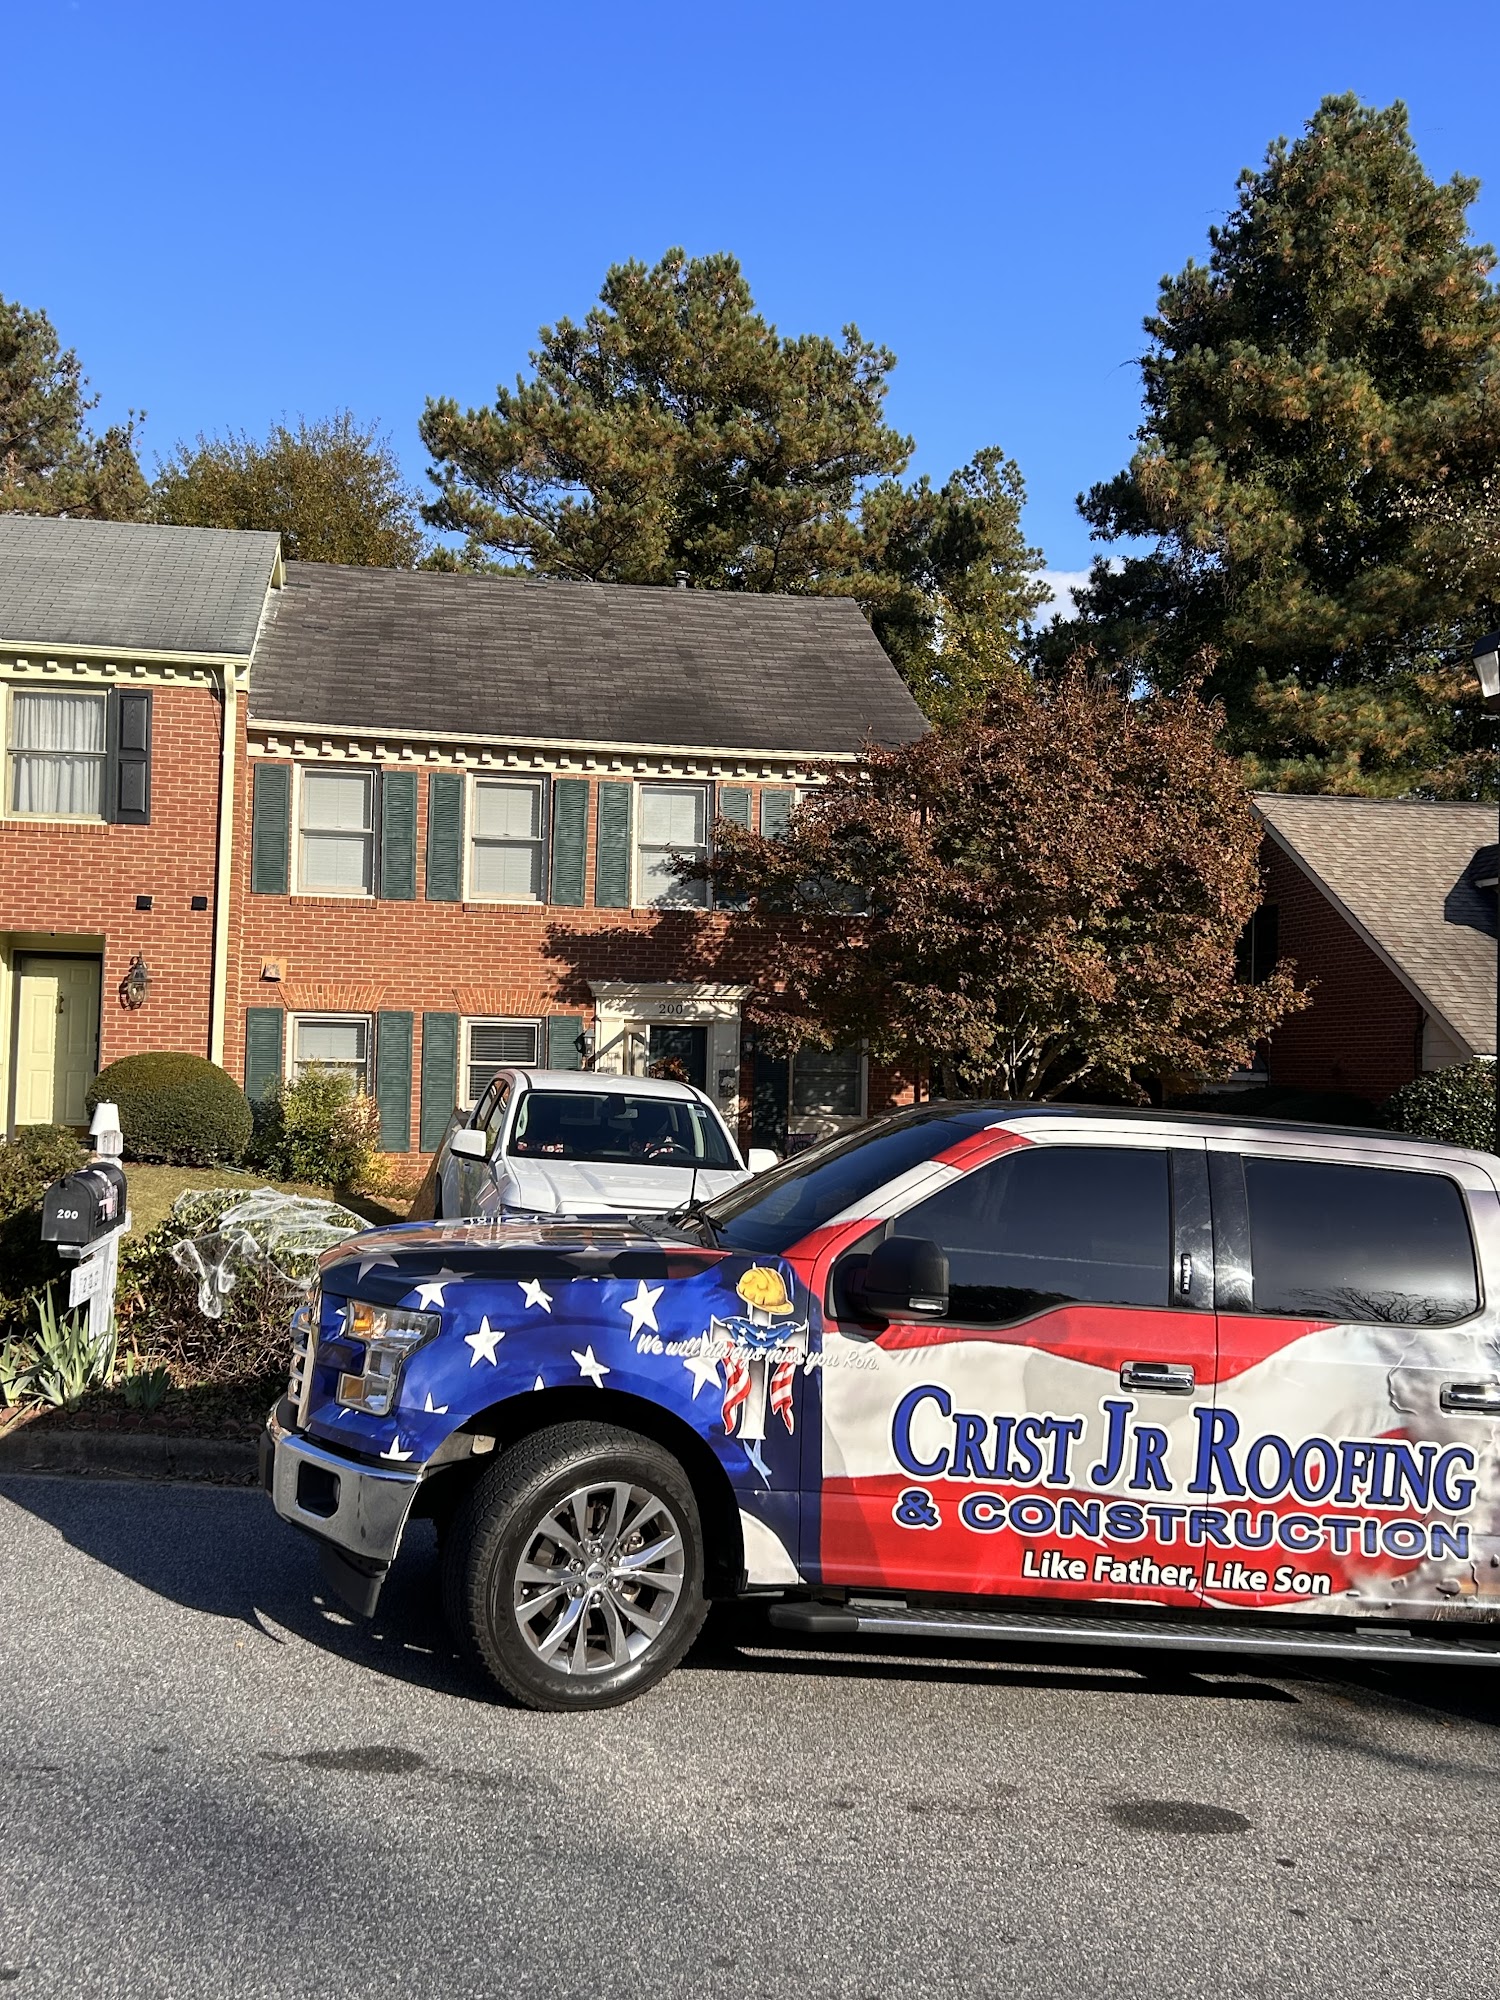 Crist Jr Roofing and Construction